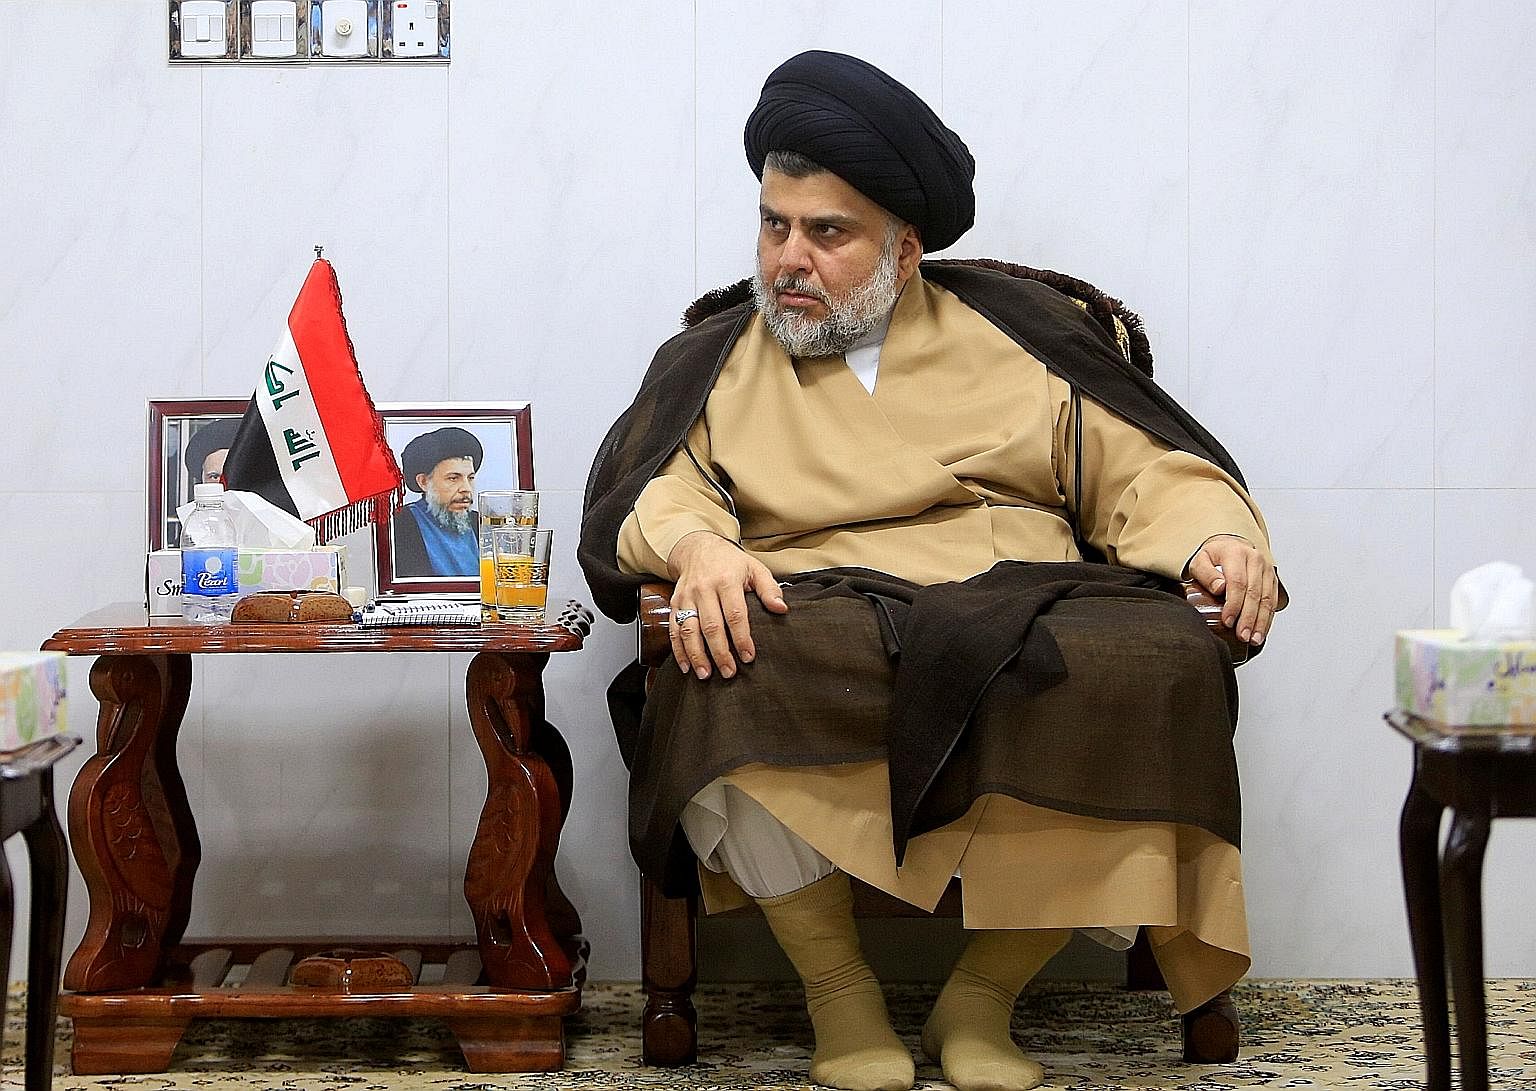 Mr Moqtada al-Sadr cannot become prime minister as he did not run in the election, but his bloc's victory puts him in a position to have a strong say in negotiations to form a coalition.